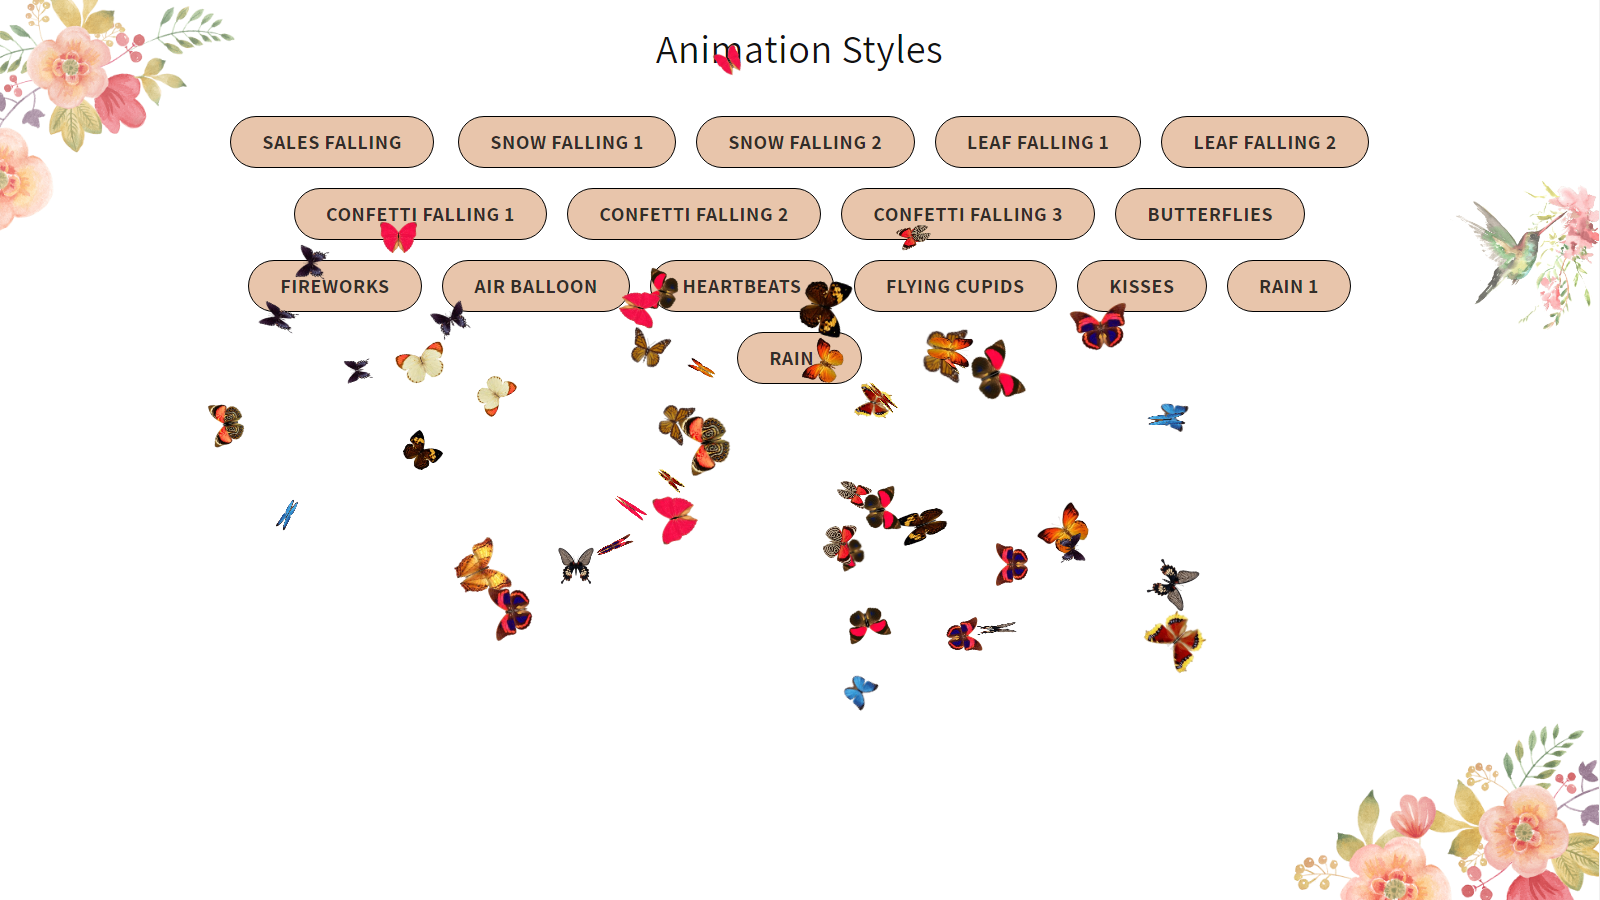 Animations styles